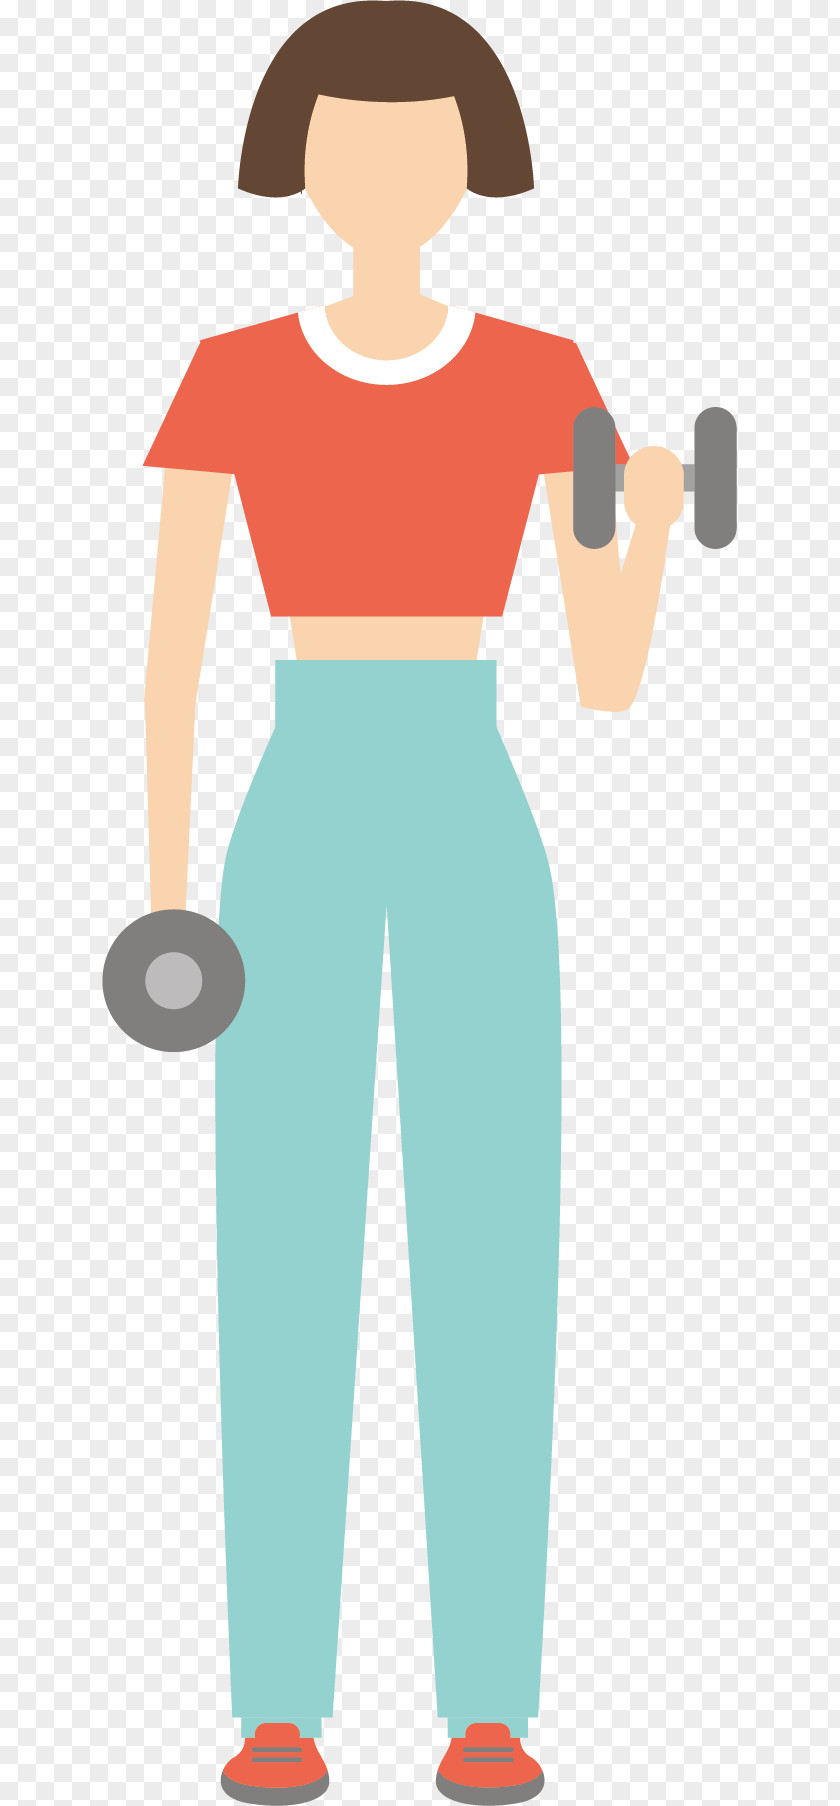 Hand Lifting Barbell Physical Exercise Illustration PNG